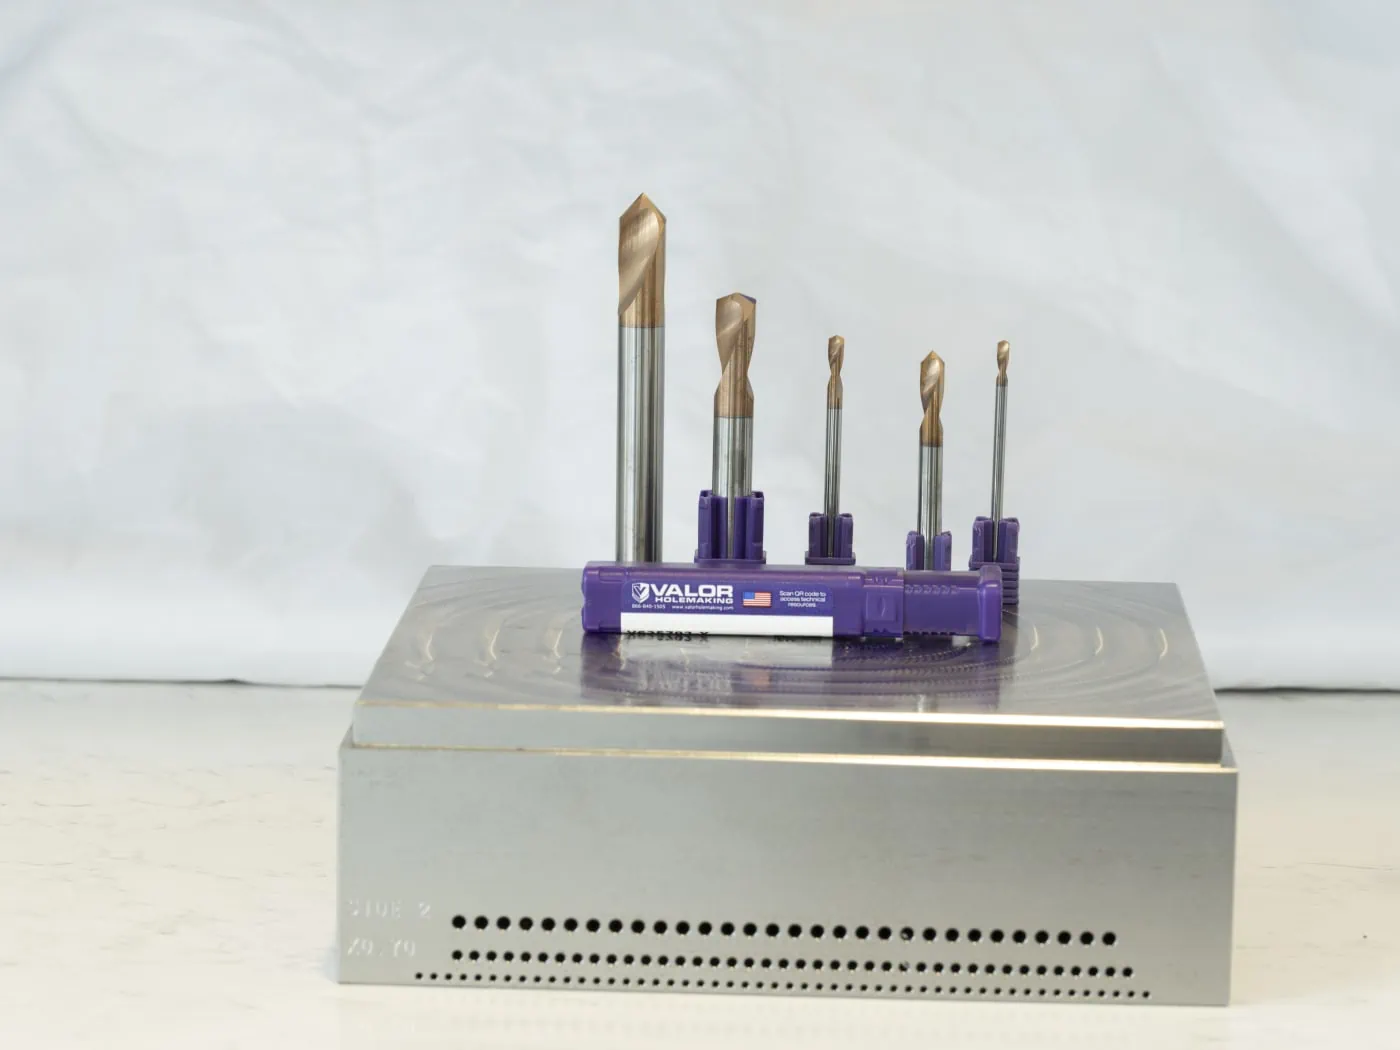 Five Valor holemaking high performance spot drills displayed on top of a workpiece with a purple product packaging container in front 